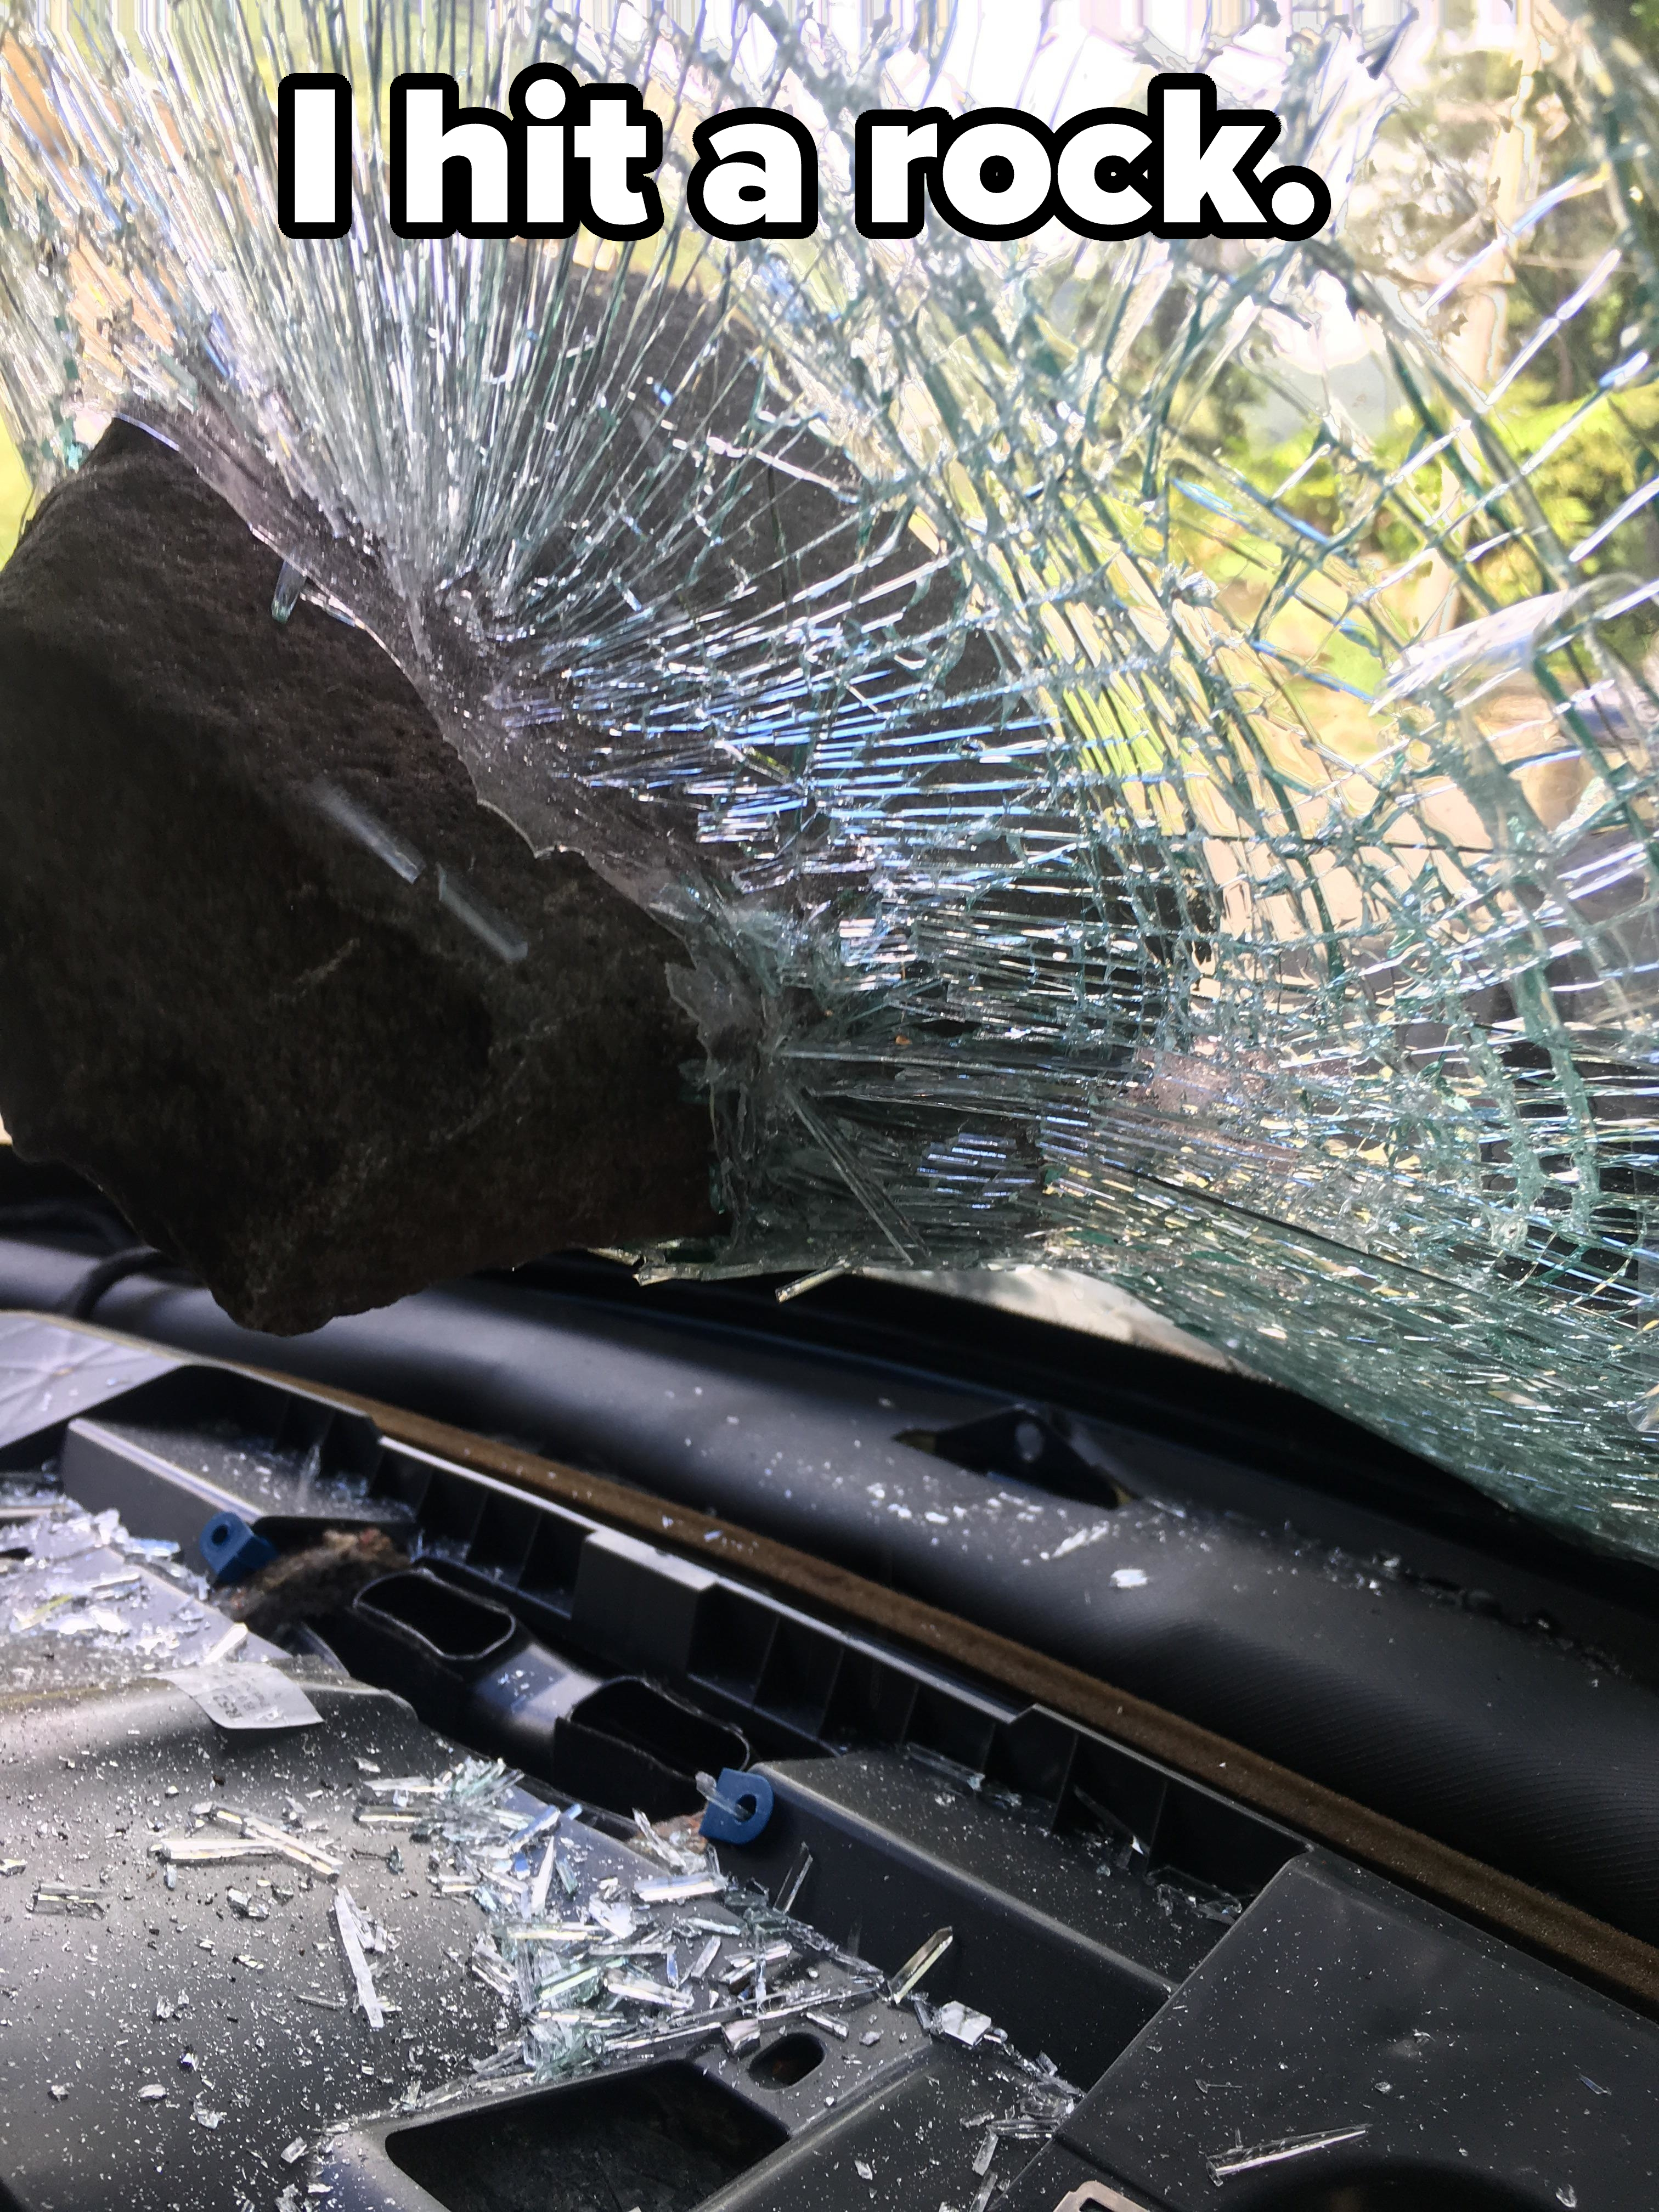 &quot;I hit a rock&quot; caption with a shattered car&#x27;s front window